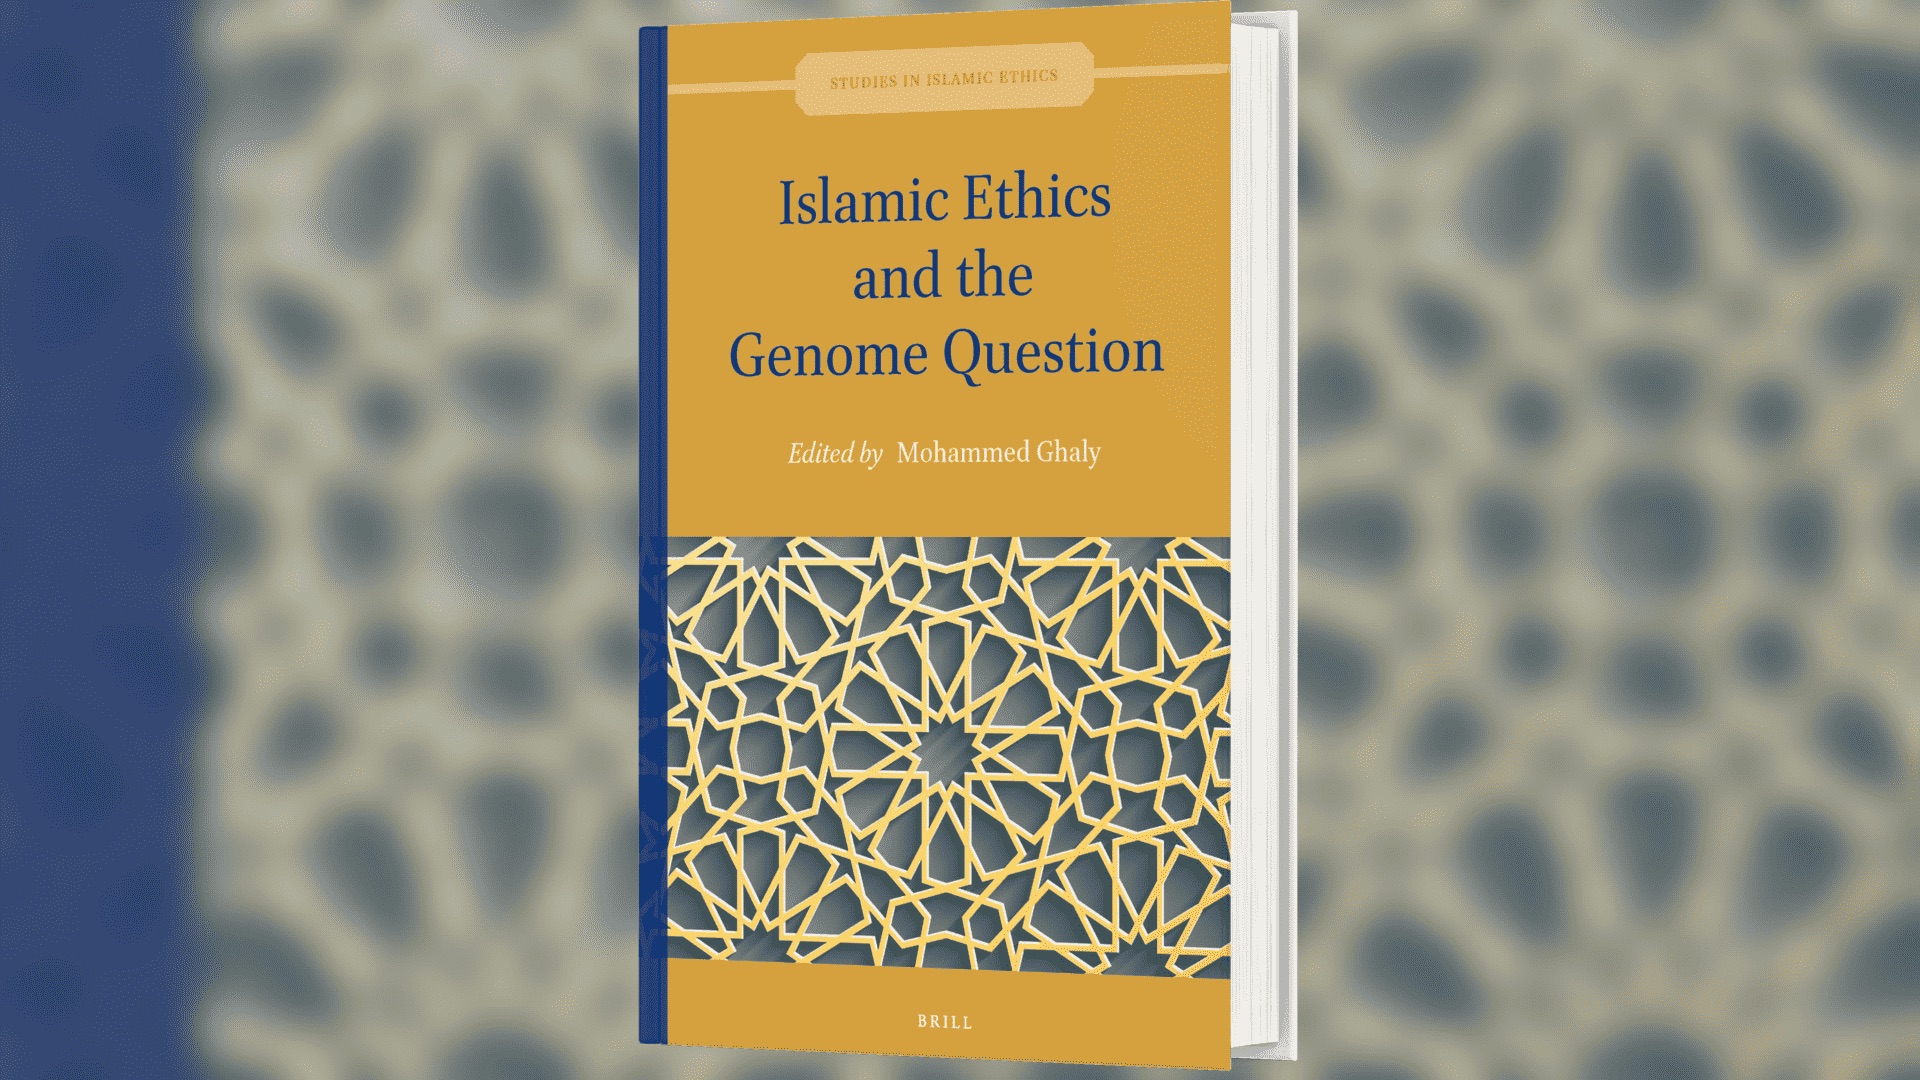 Volume 1 of Studies in Islamic Ethics "Islamic Ethics and the Genome Question"